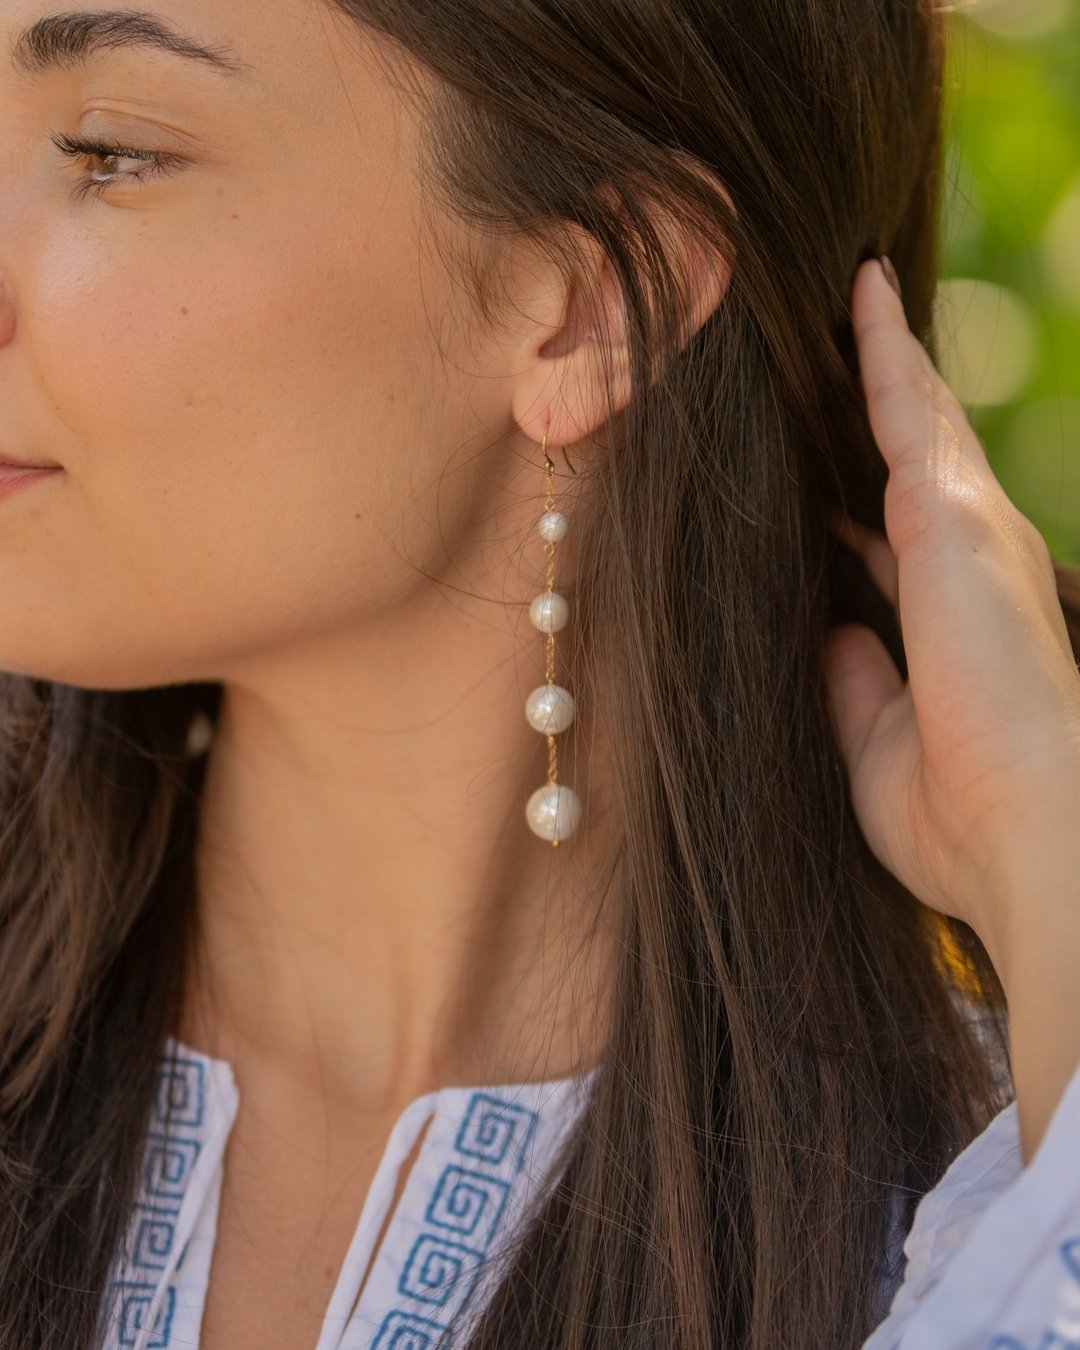 Never enough pearls 🤍✨ #jewelry #musthave #accessories #boutiquebuys #trendyjewelry #shopsmall #islamorada #islamoradashopping